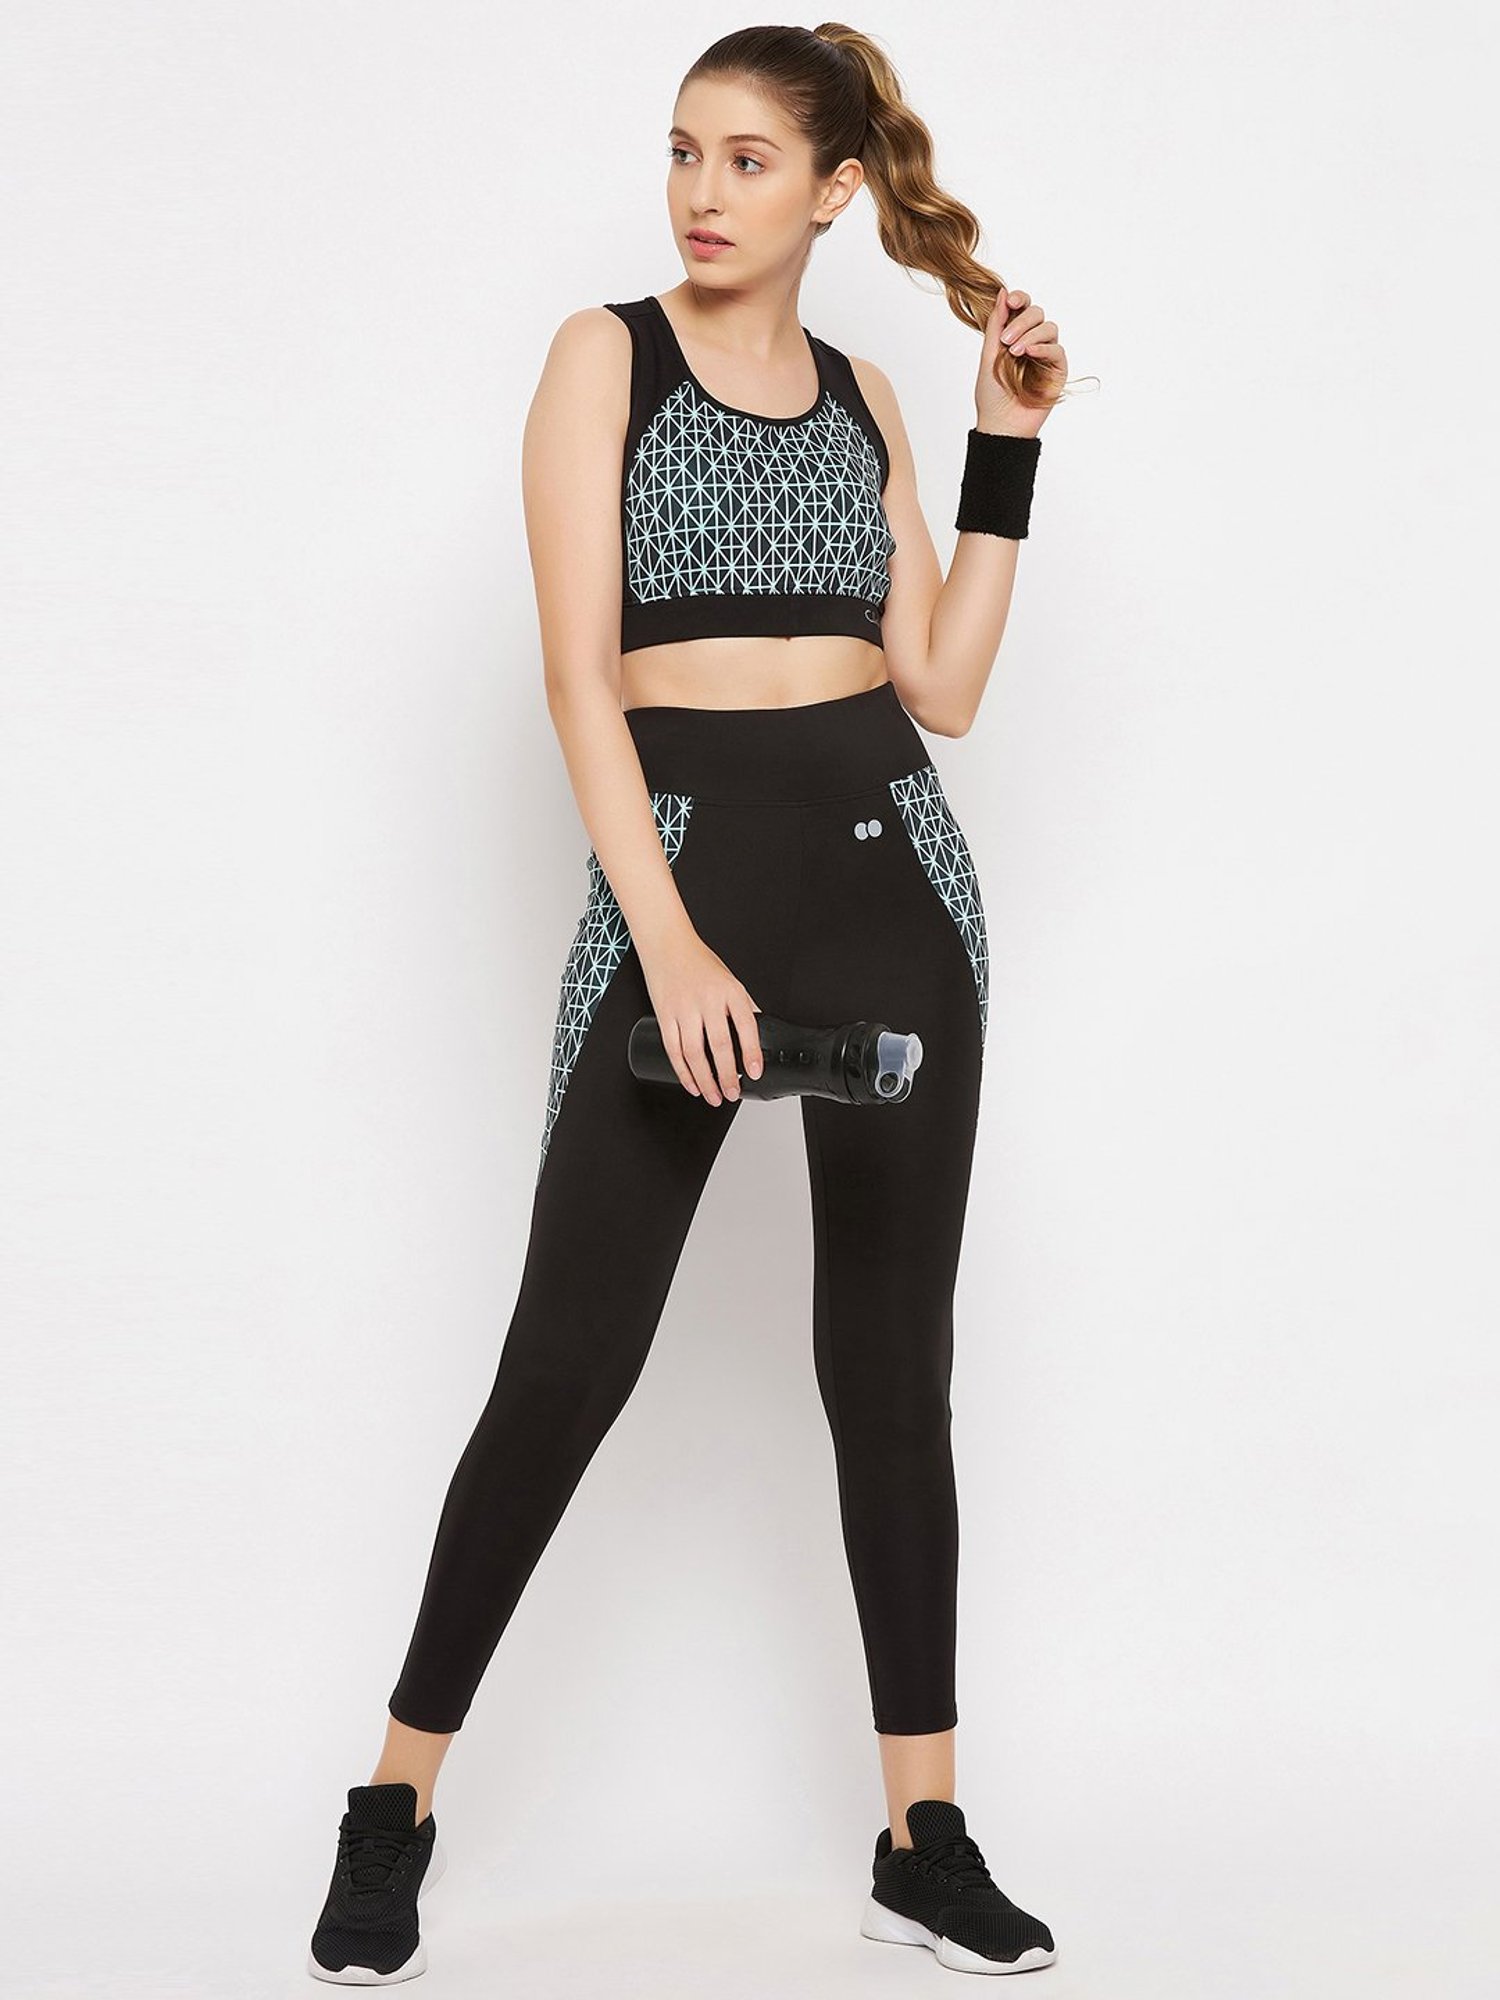 Shop Active Colorblock Leggings for Women from latest collection at Forever  21